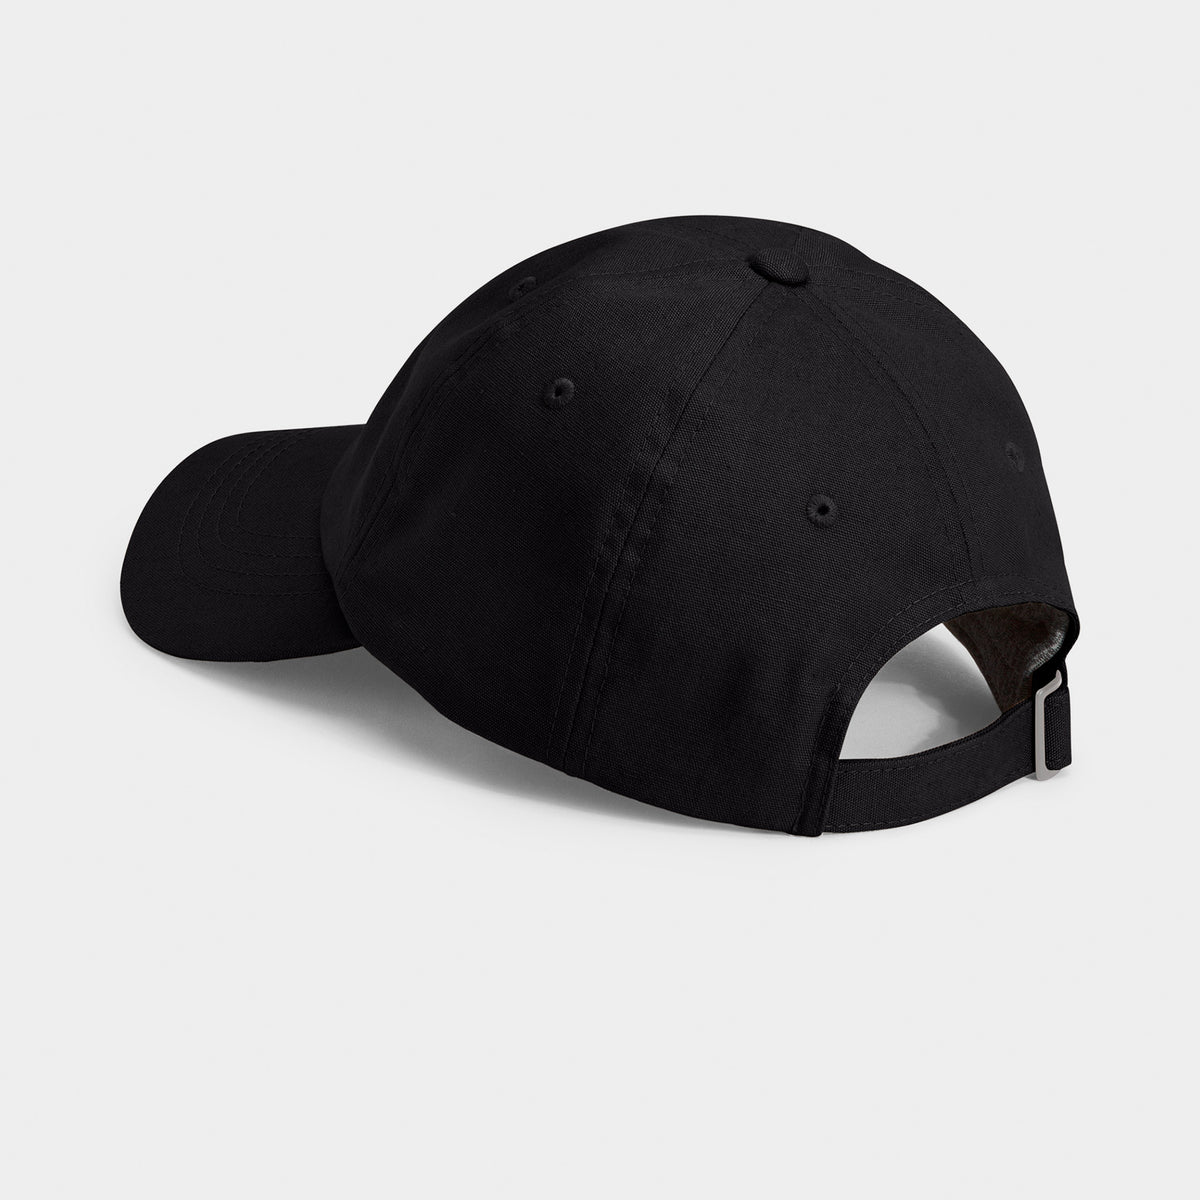 The North Face Norm Hat / TNF Black | JD Sports Canada